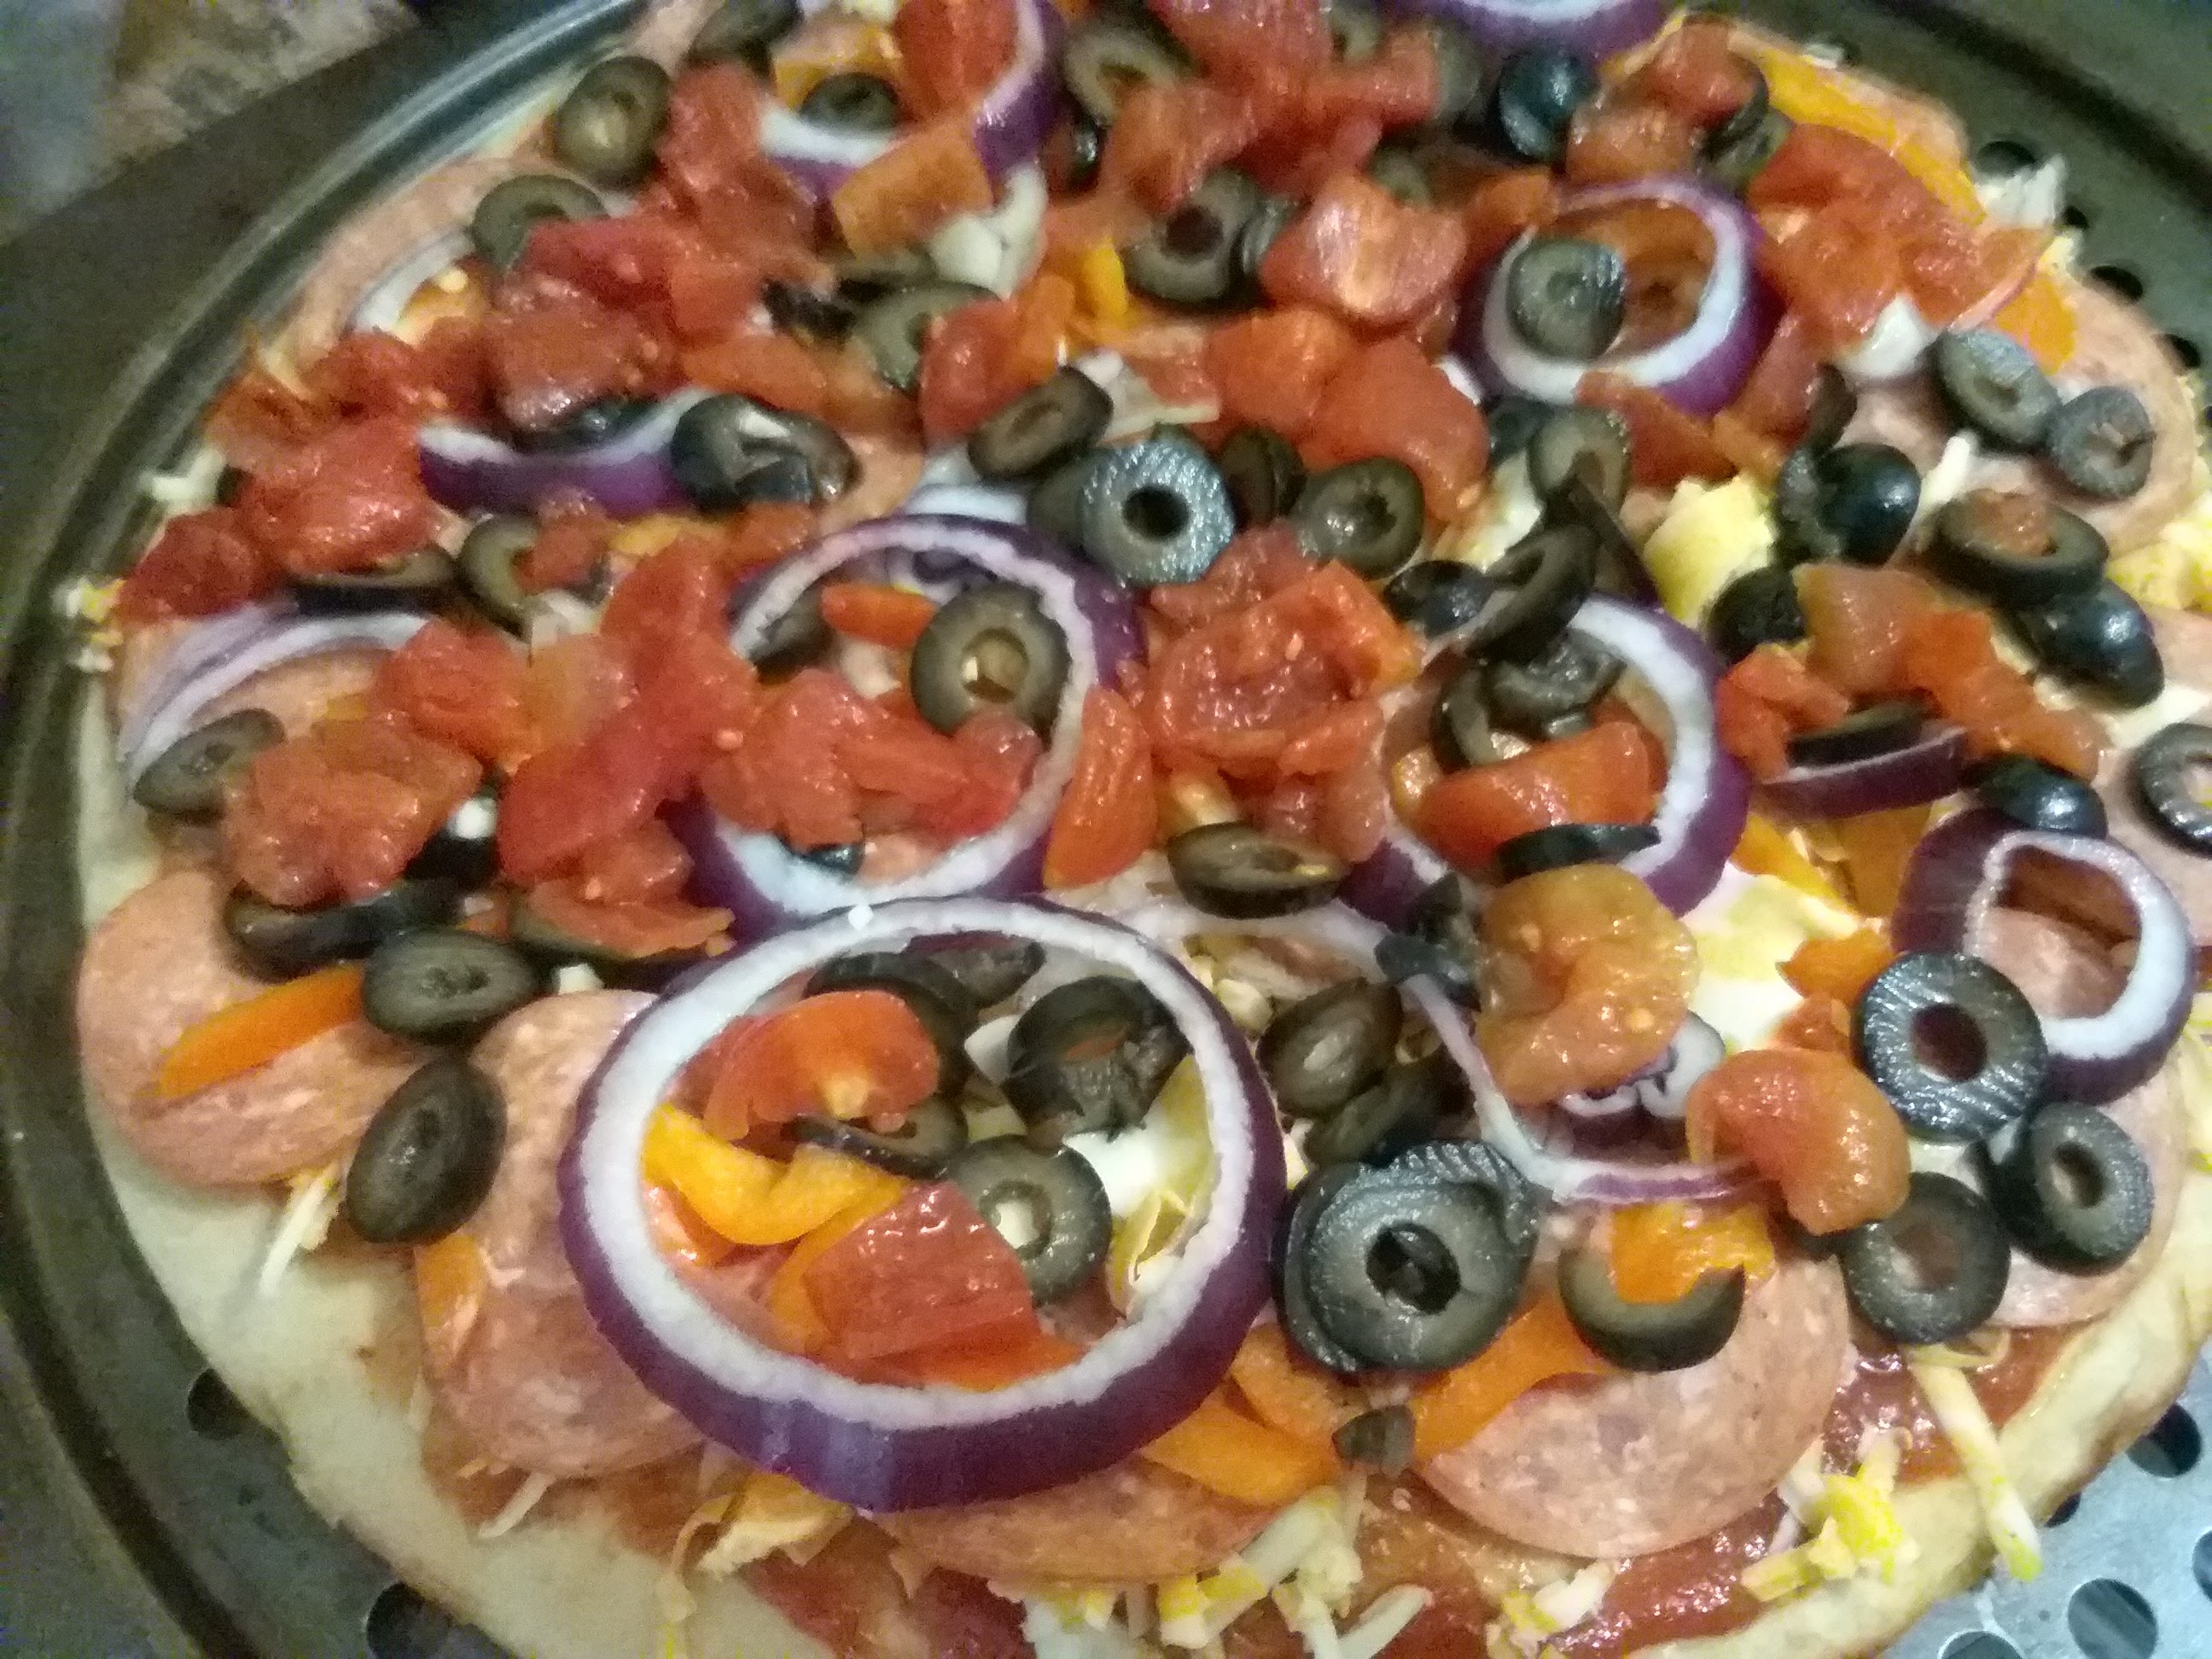 Pepperoni pizza with black olives